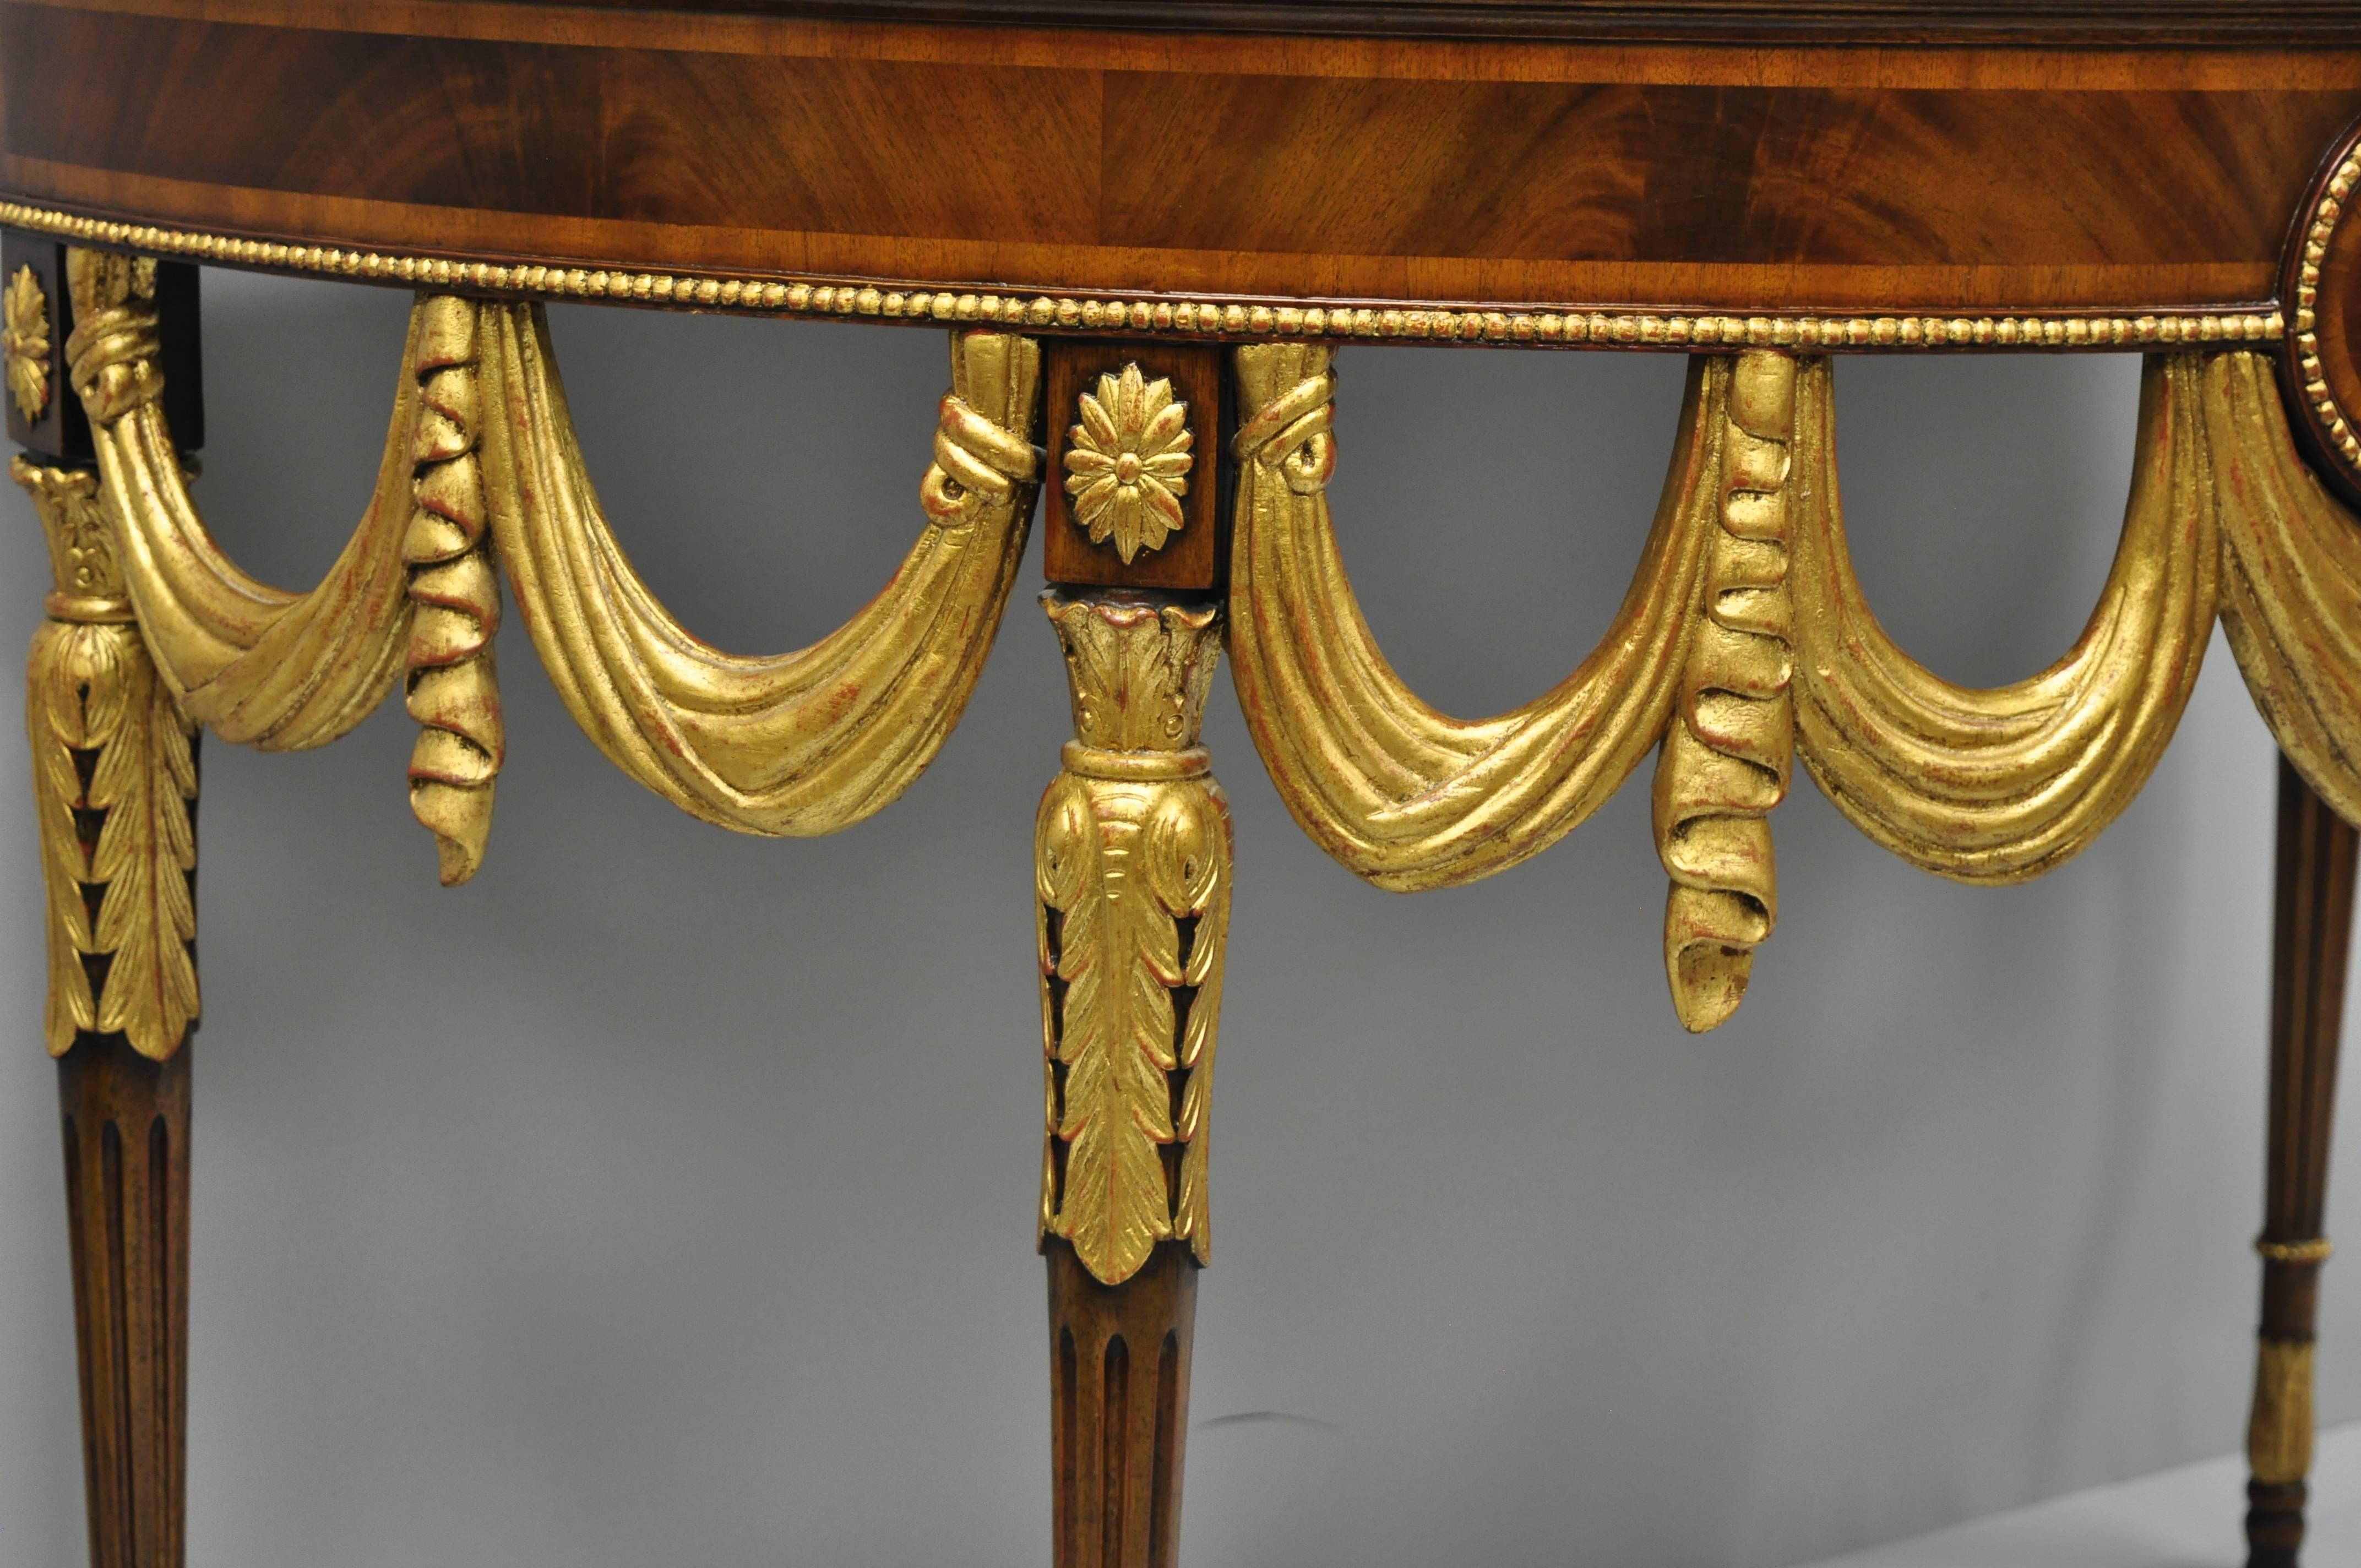 Wood Maitland Smith Half Round Demilune Inlaid Console Table Regency Gold Gilt Drapes